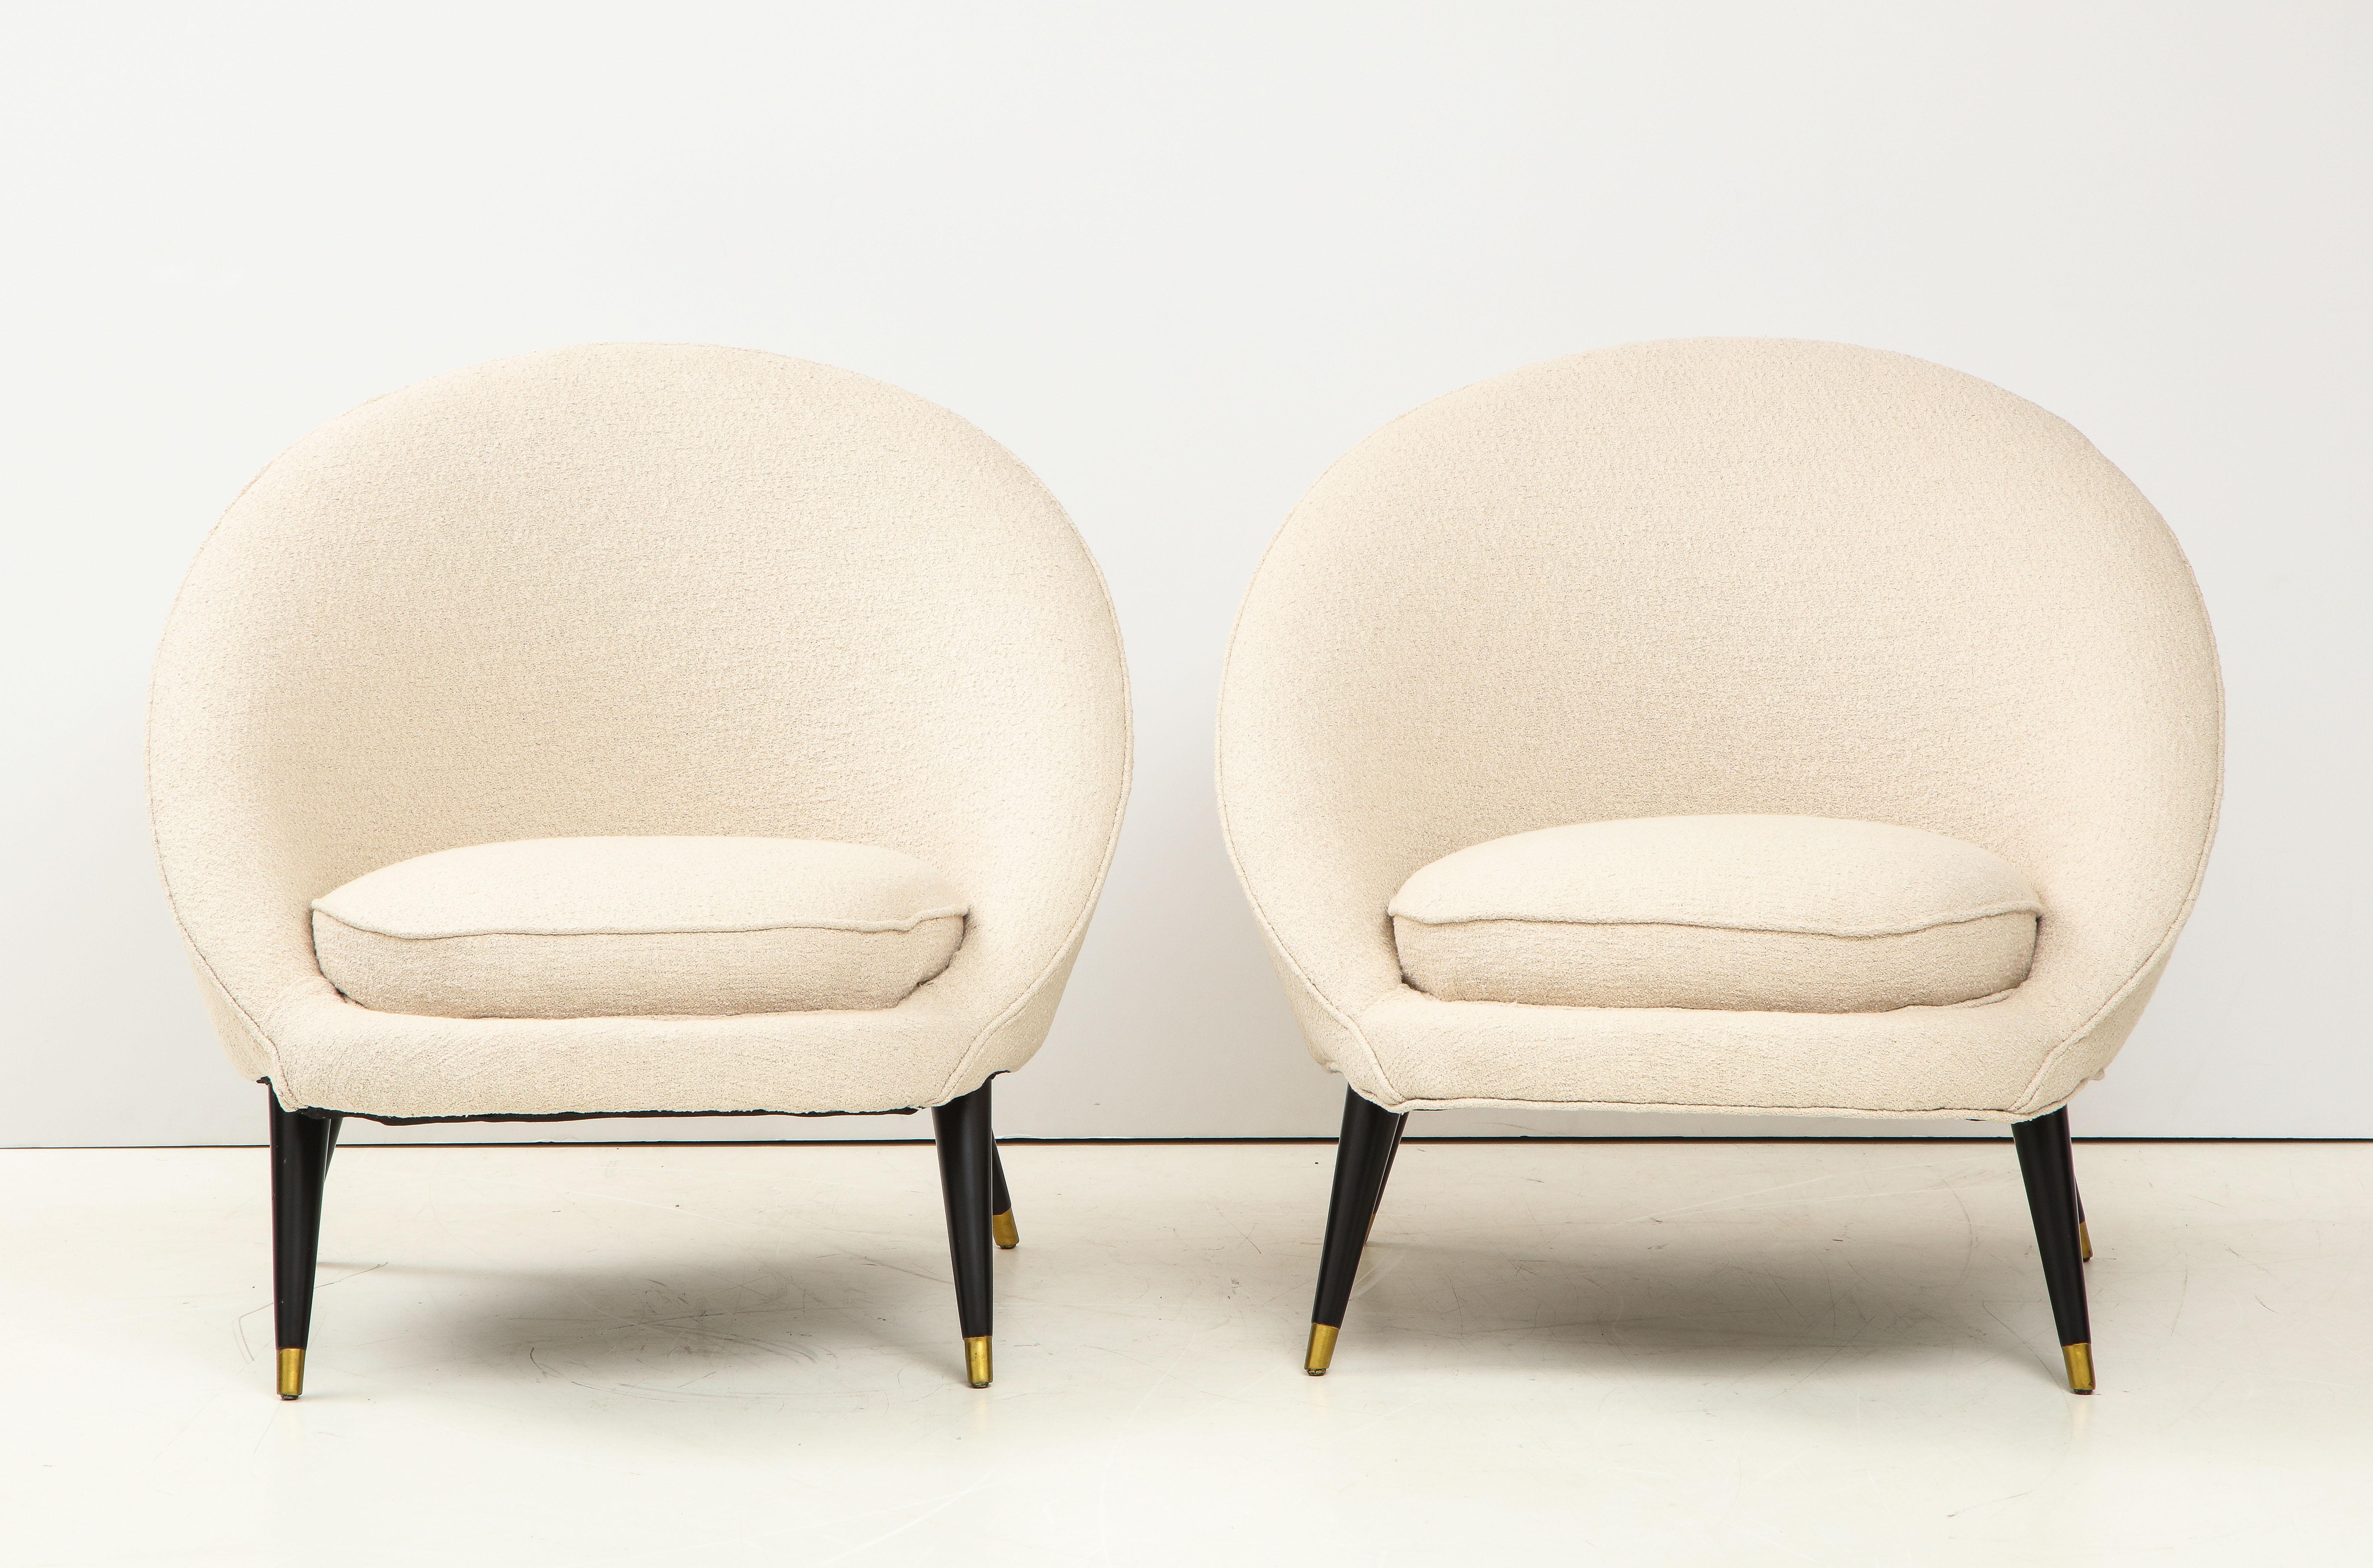 Stunning pair of 1960s modernist French lounge chairs, with black lacquered legs and gold detail newly reupholstered in Donghia fabric.